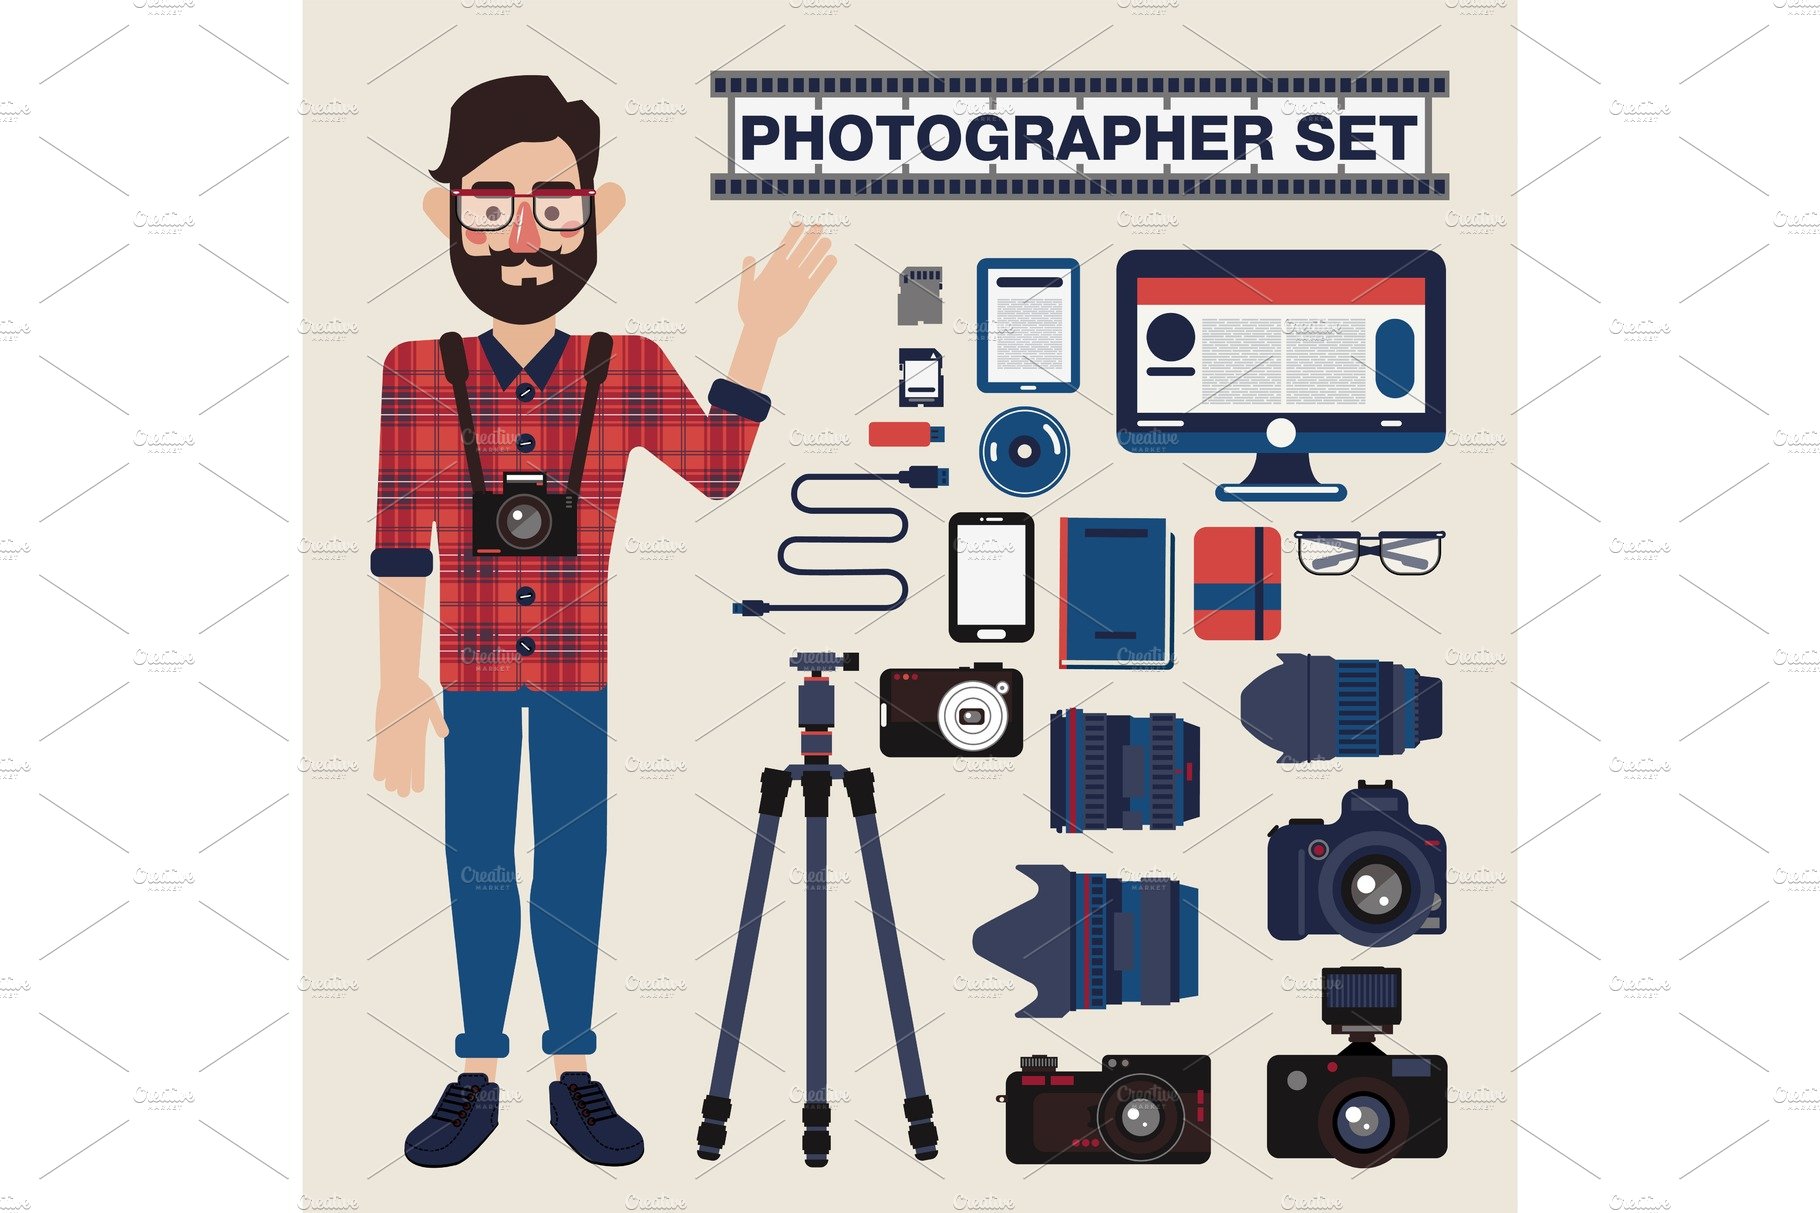 Professional Photographer Set Icons cover image.